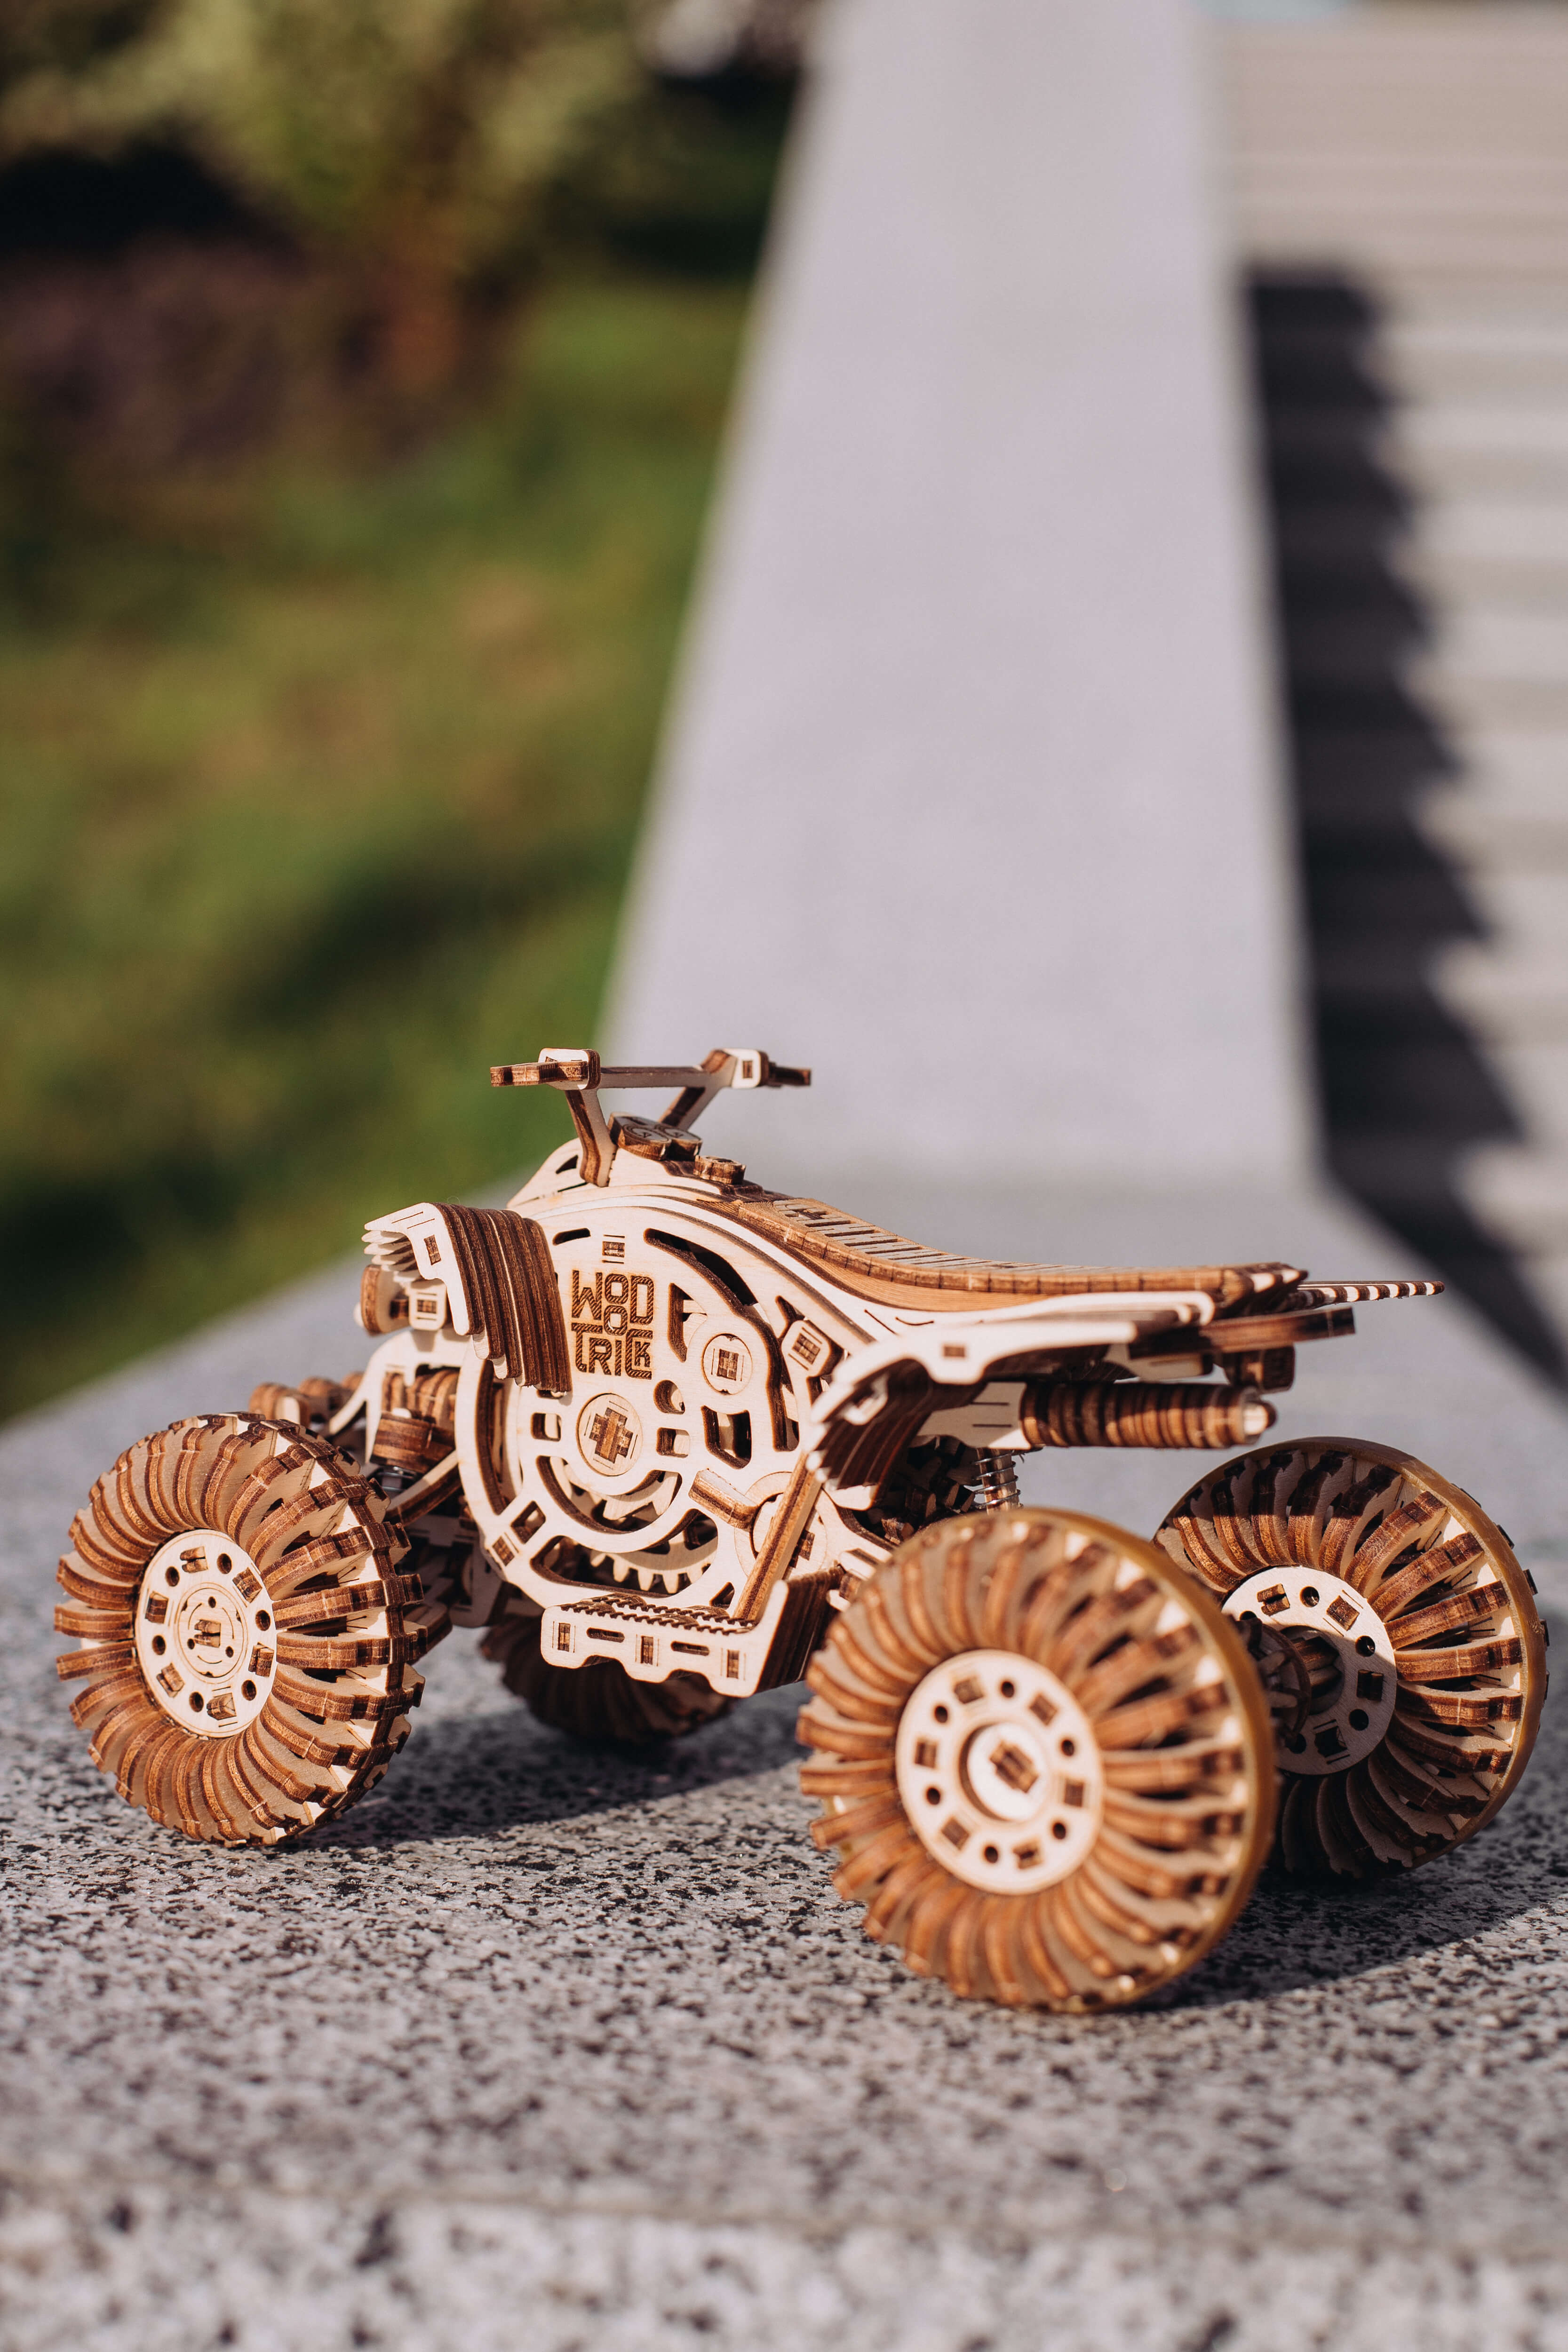 Ugears DIY 3D model kit Tracked Off-Road Vehicle